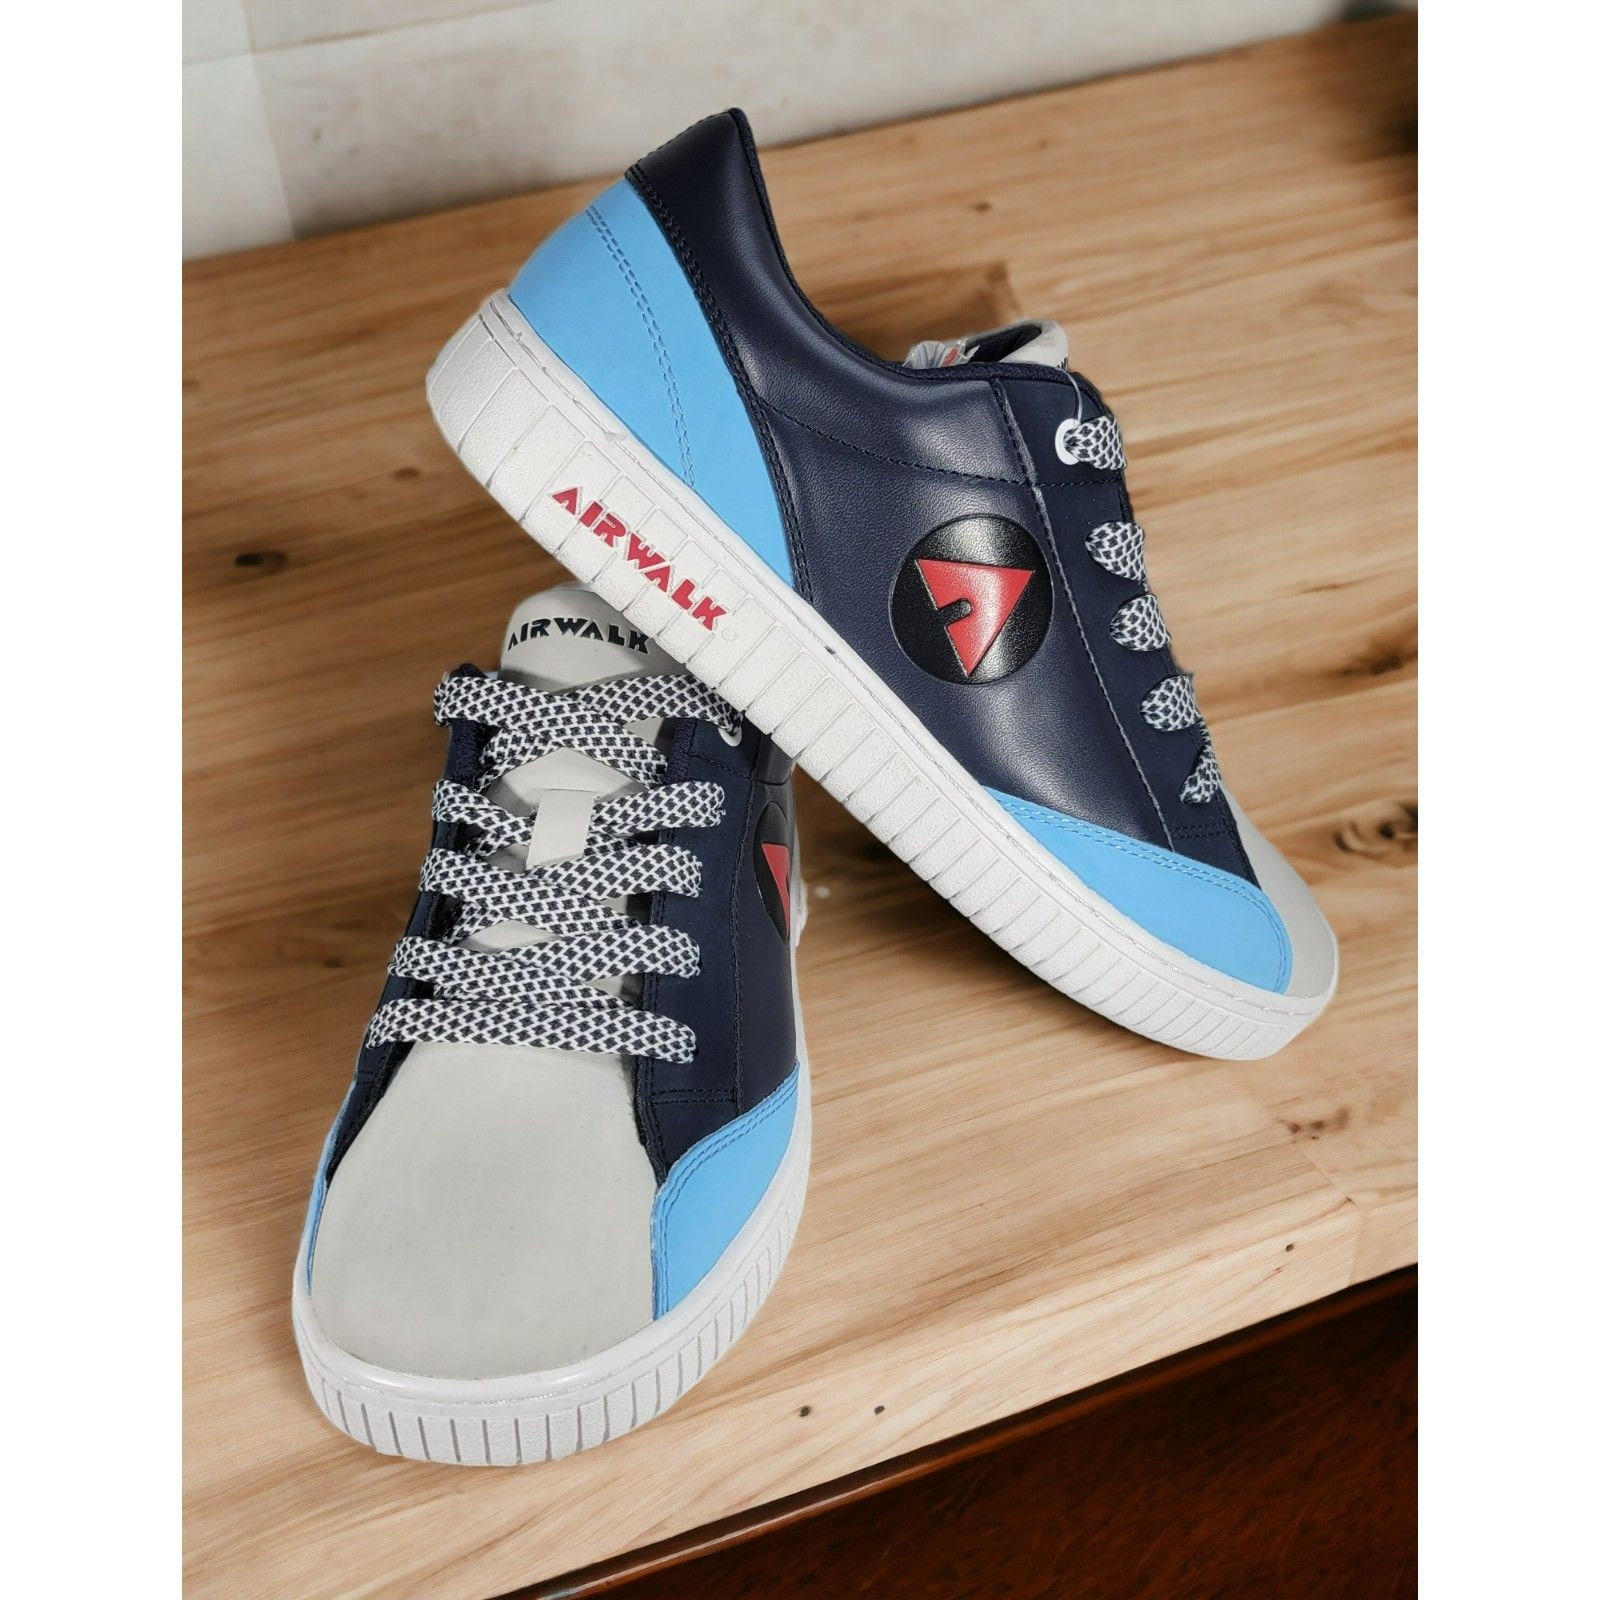 AIRWALK CANVAS SKATEBOARD STYLE LACE-UP SHOES/SNEAKERS, BLUE, SZ 3.5, FREE  S&H | eBay